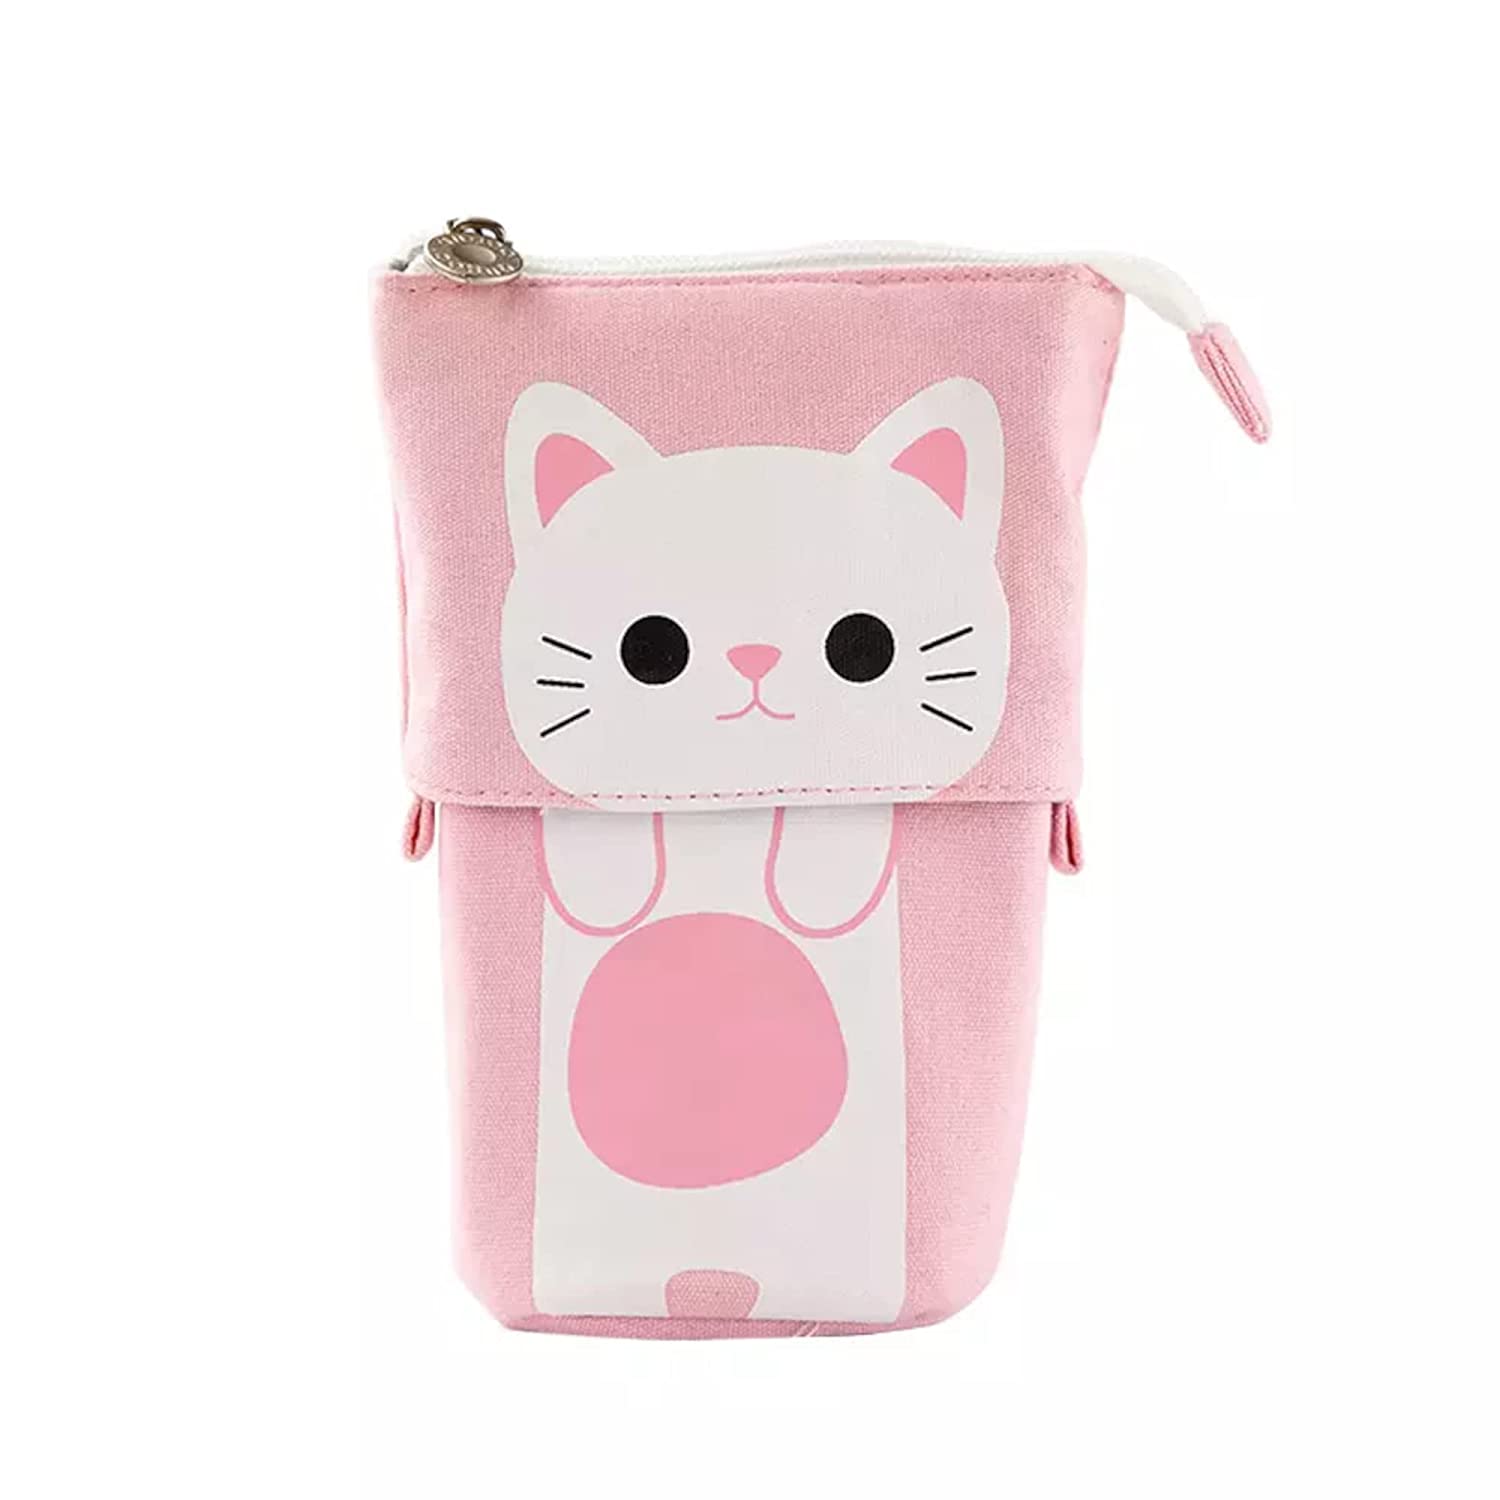 Small Cute Pencil Cases Stand Up Pencil Holder Telescopic Pencil Case Pen  Pouch Bag For Student Teens Girls Adults